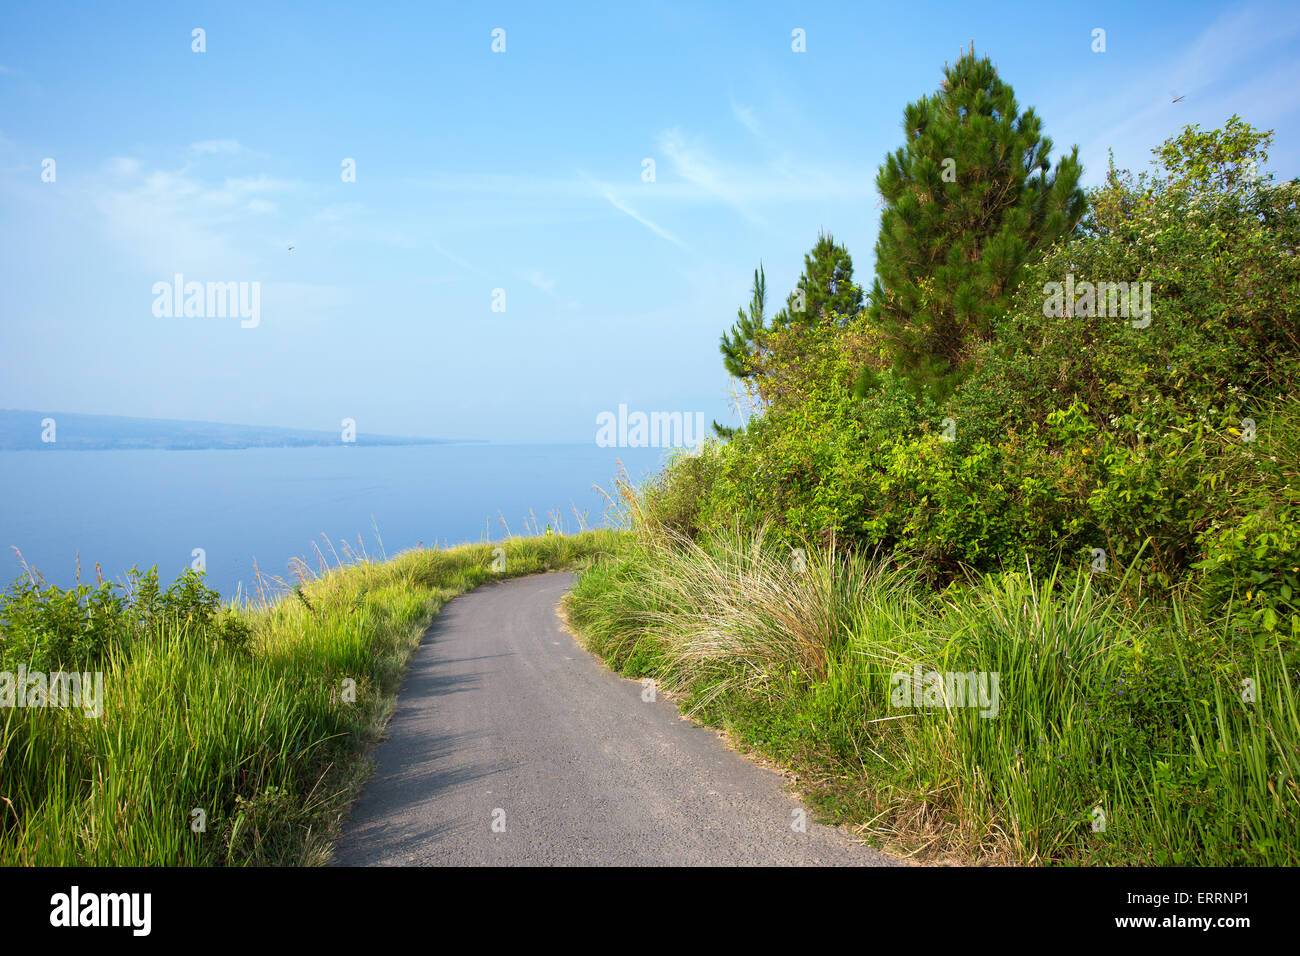 View of a mountain road and Lake Toba, Indonesia, Southeast Asia Stock Photo